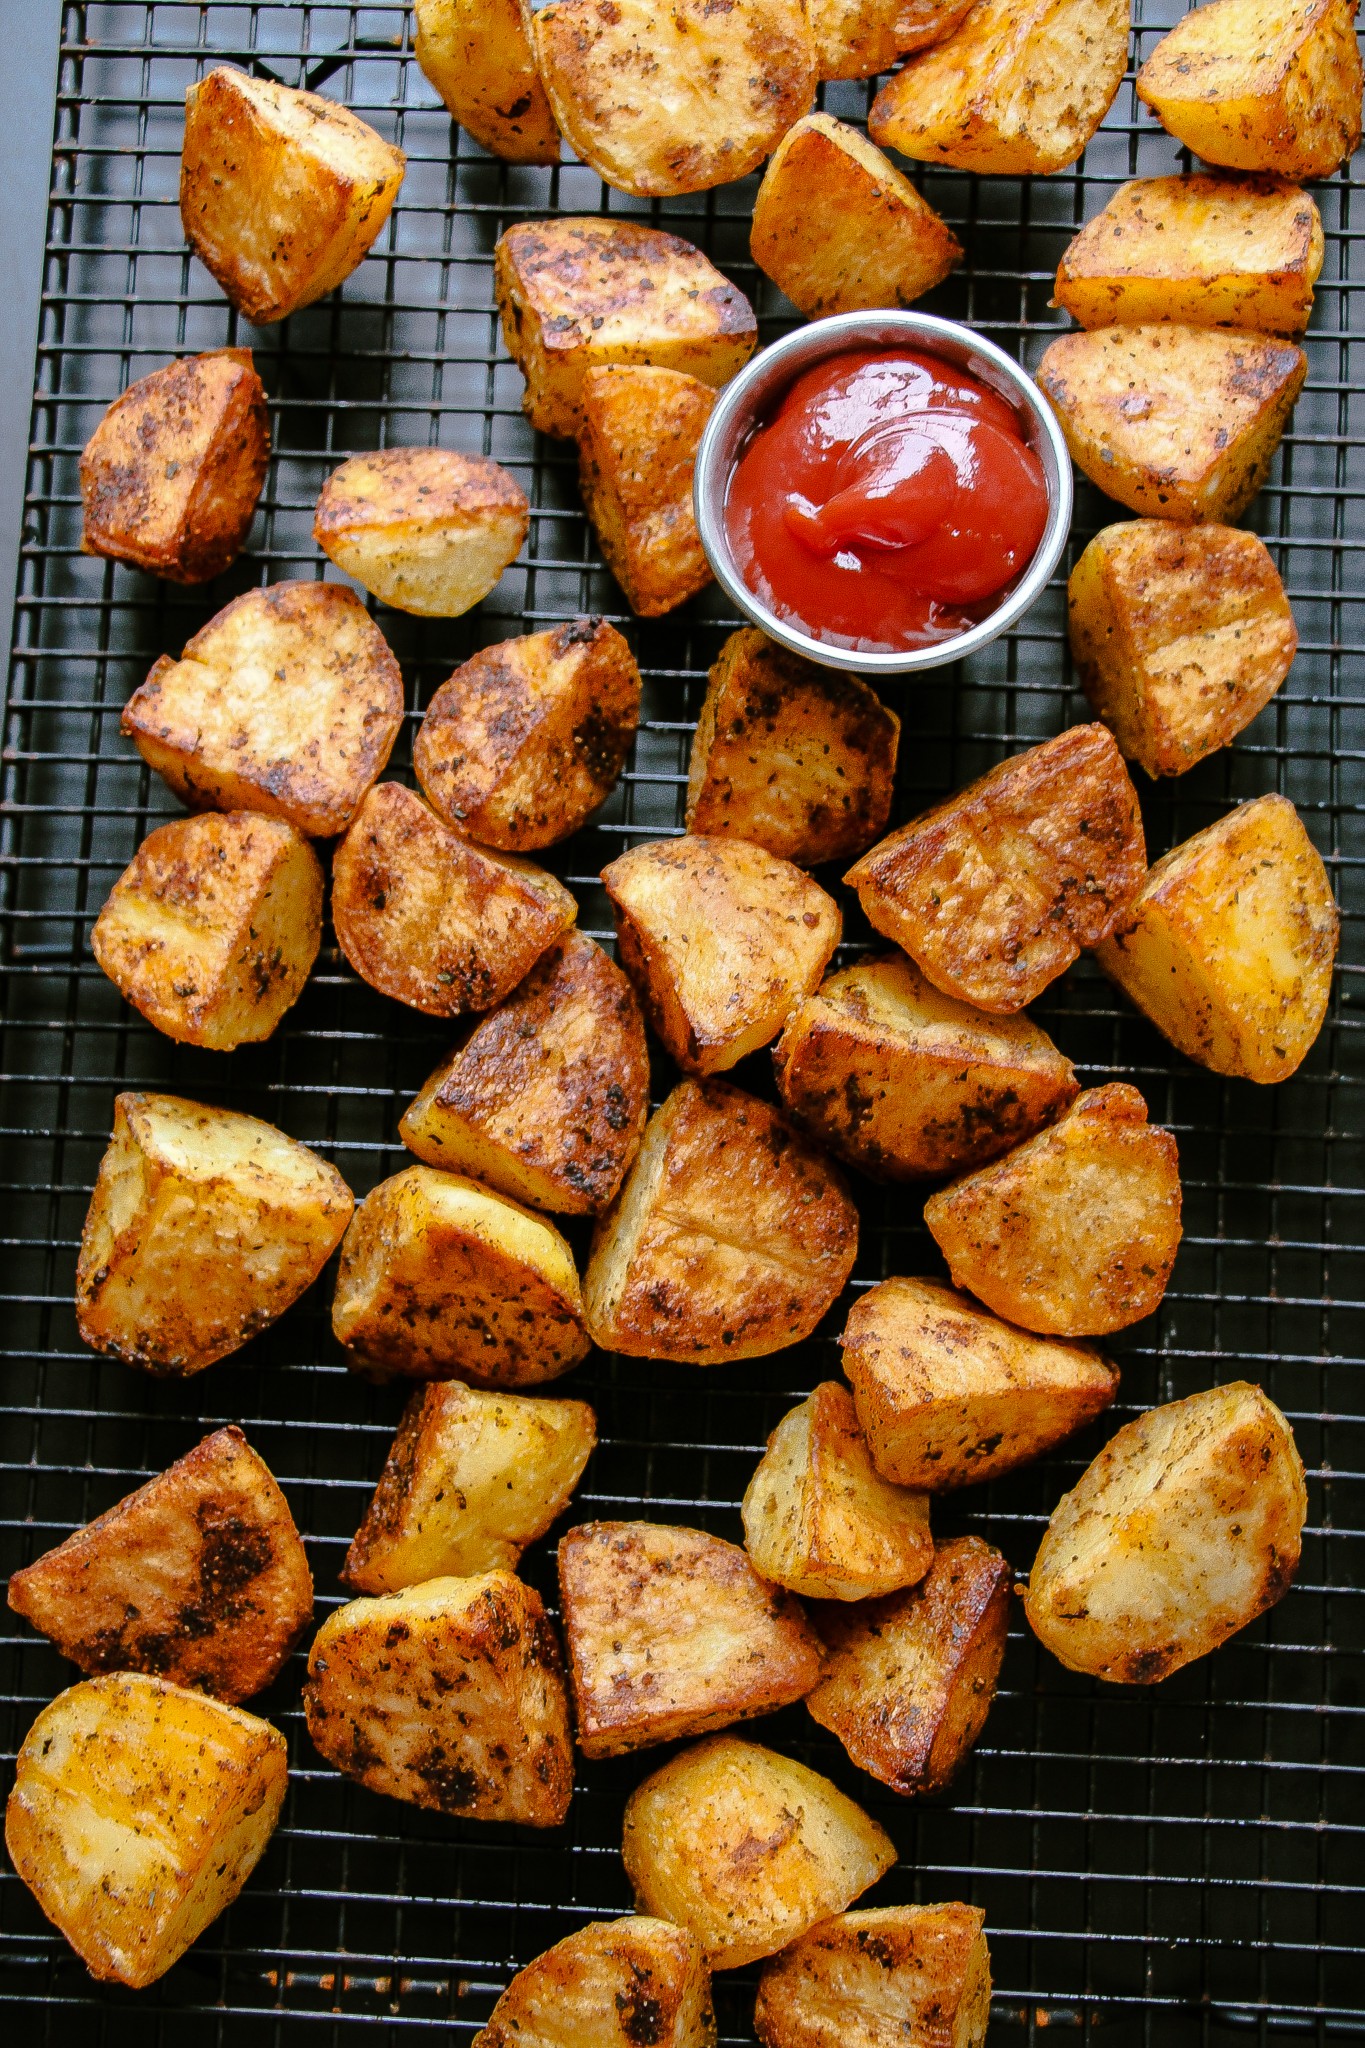 Extra Crispy Oven-Roasted Potatoes - Layers of Happiness